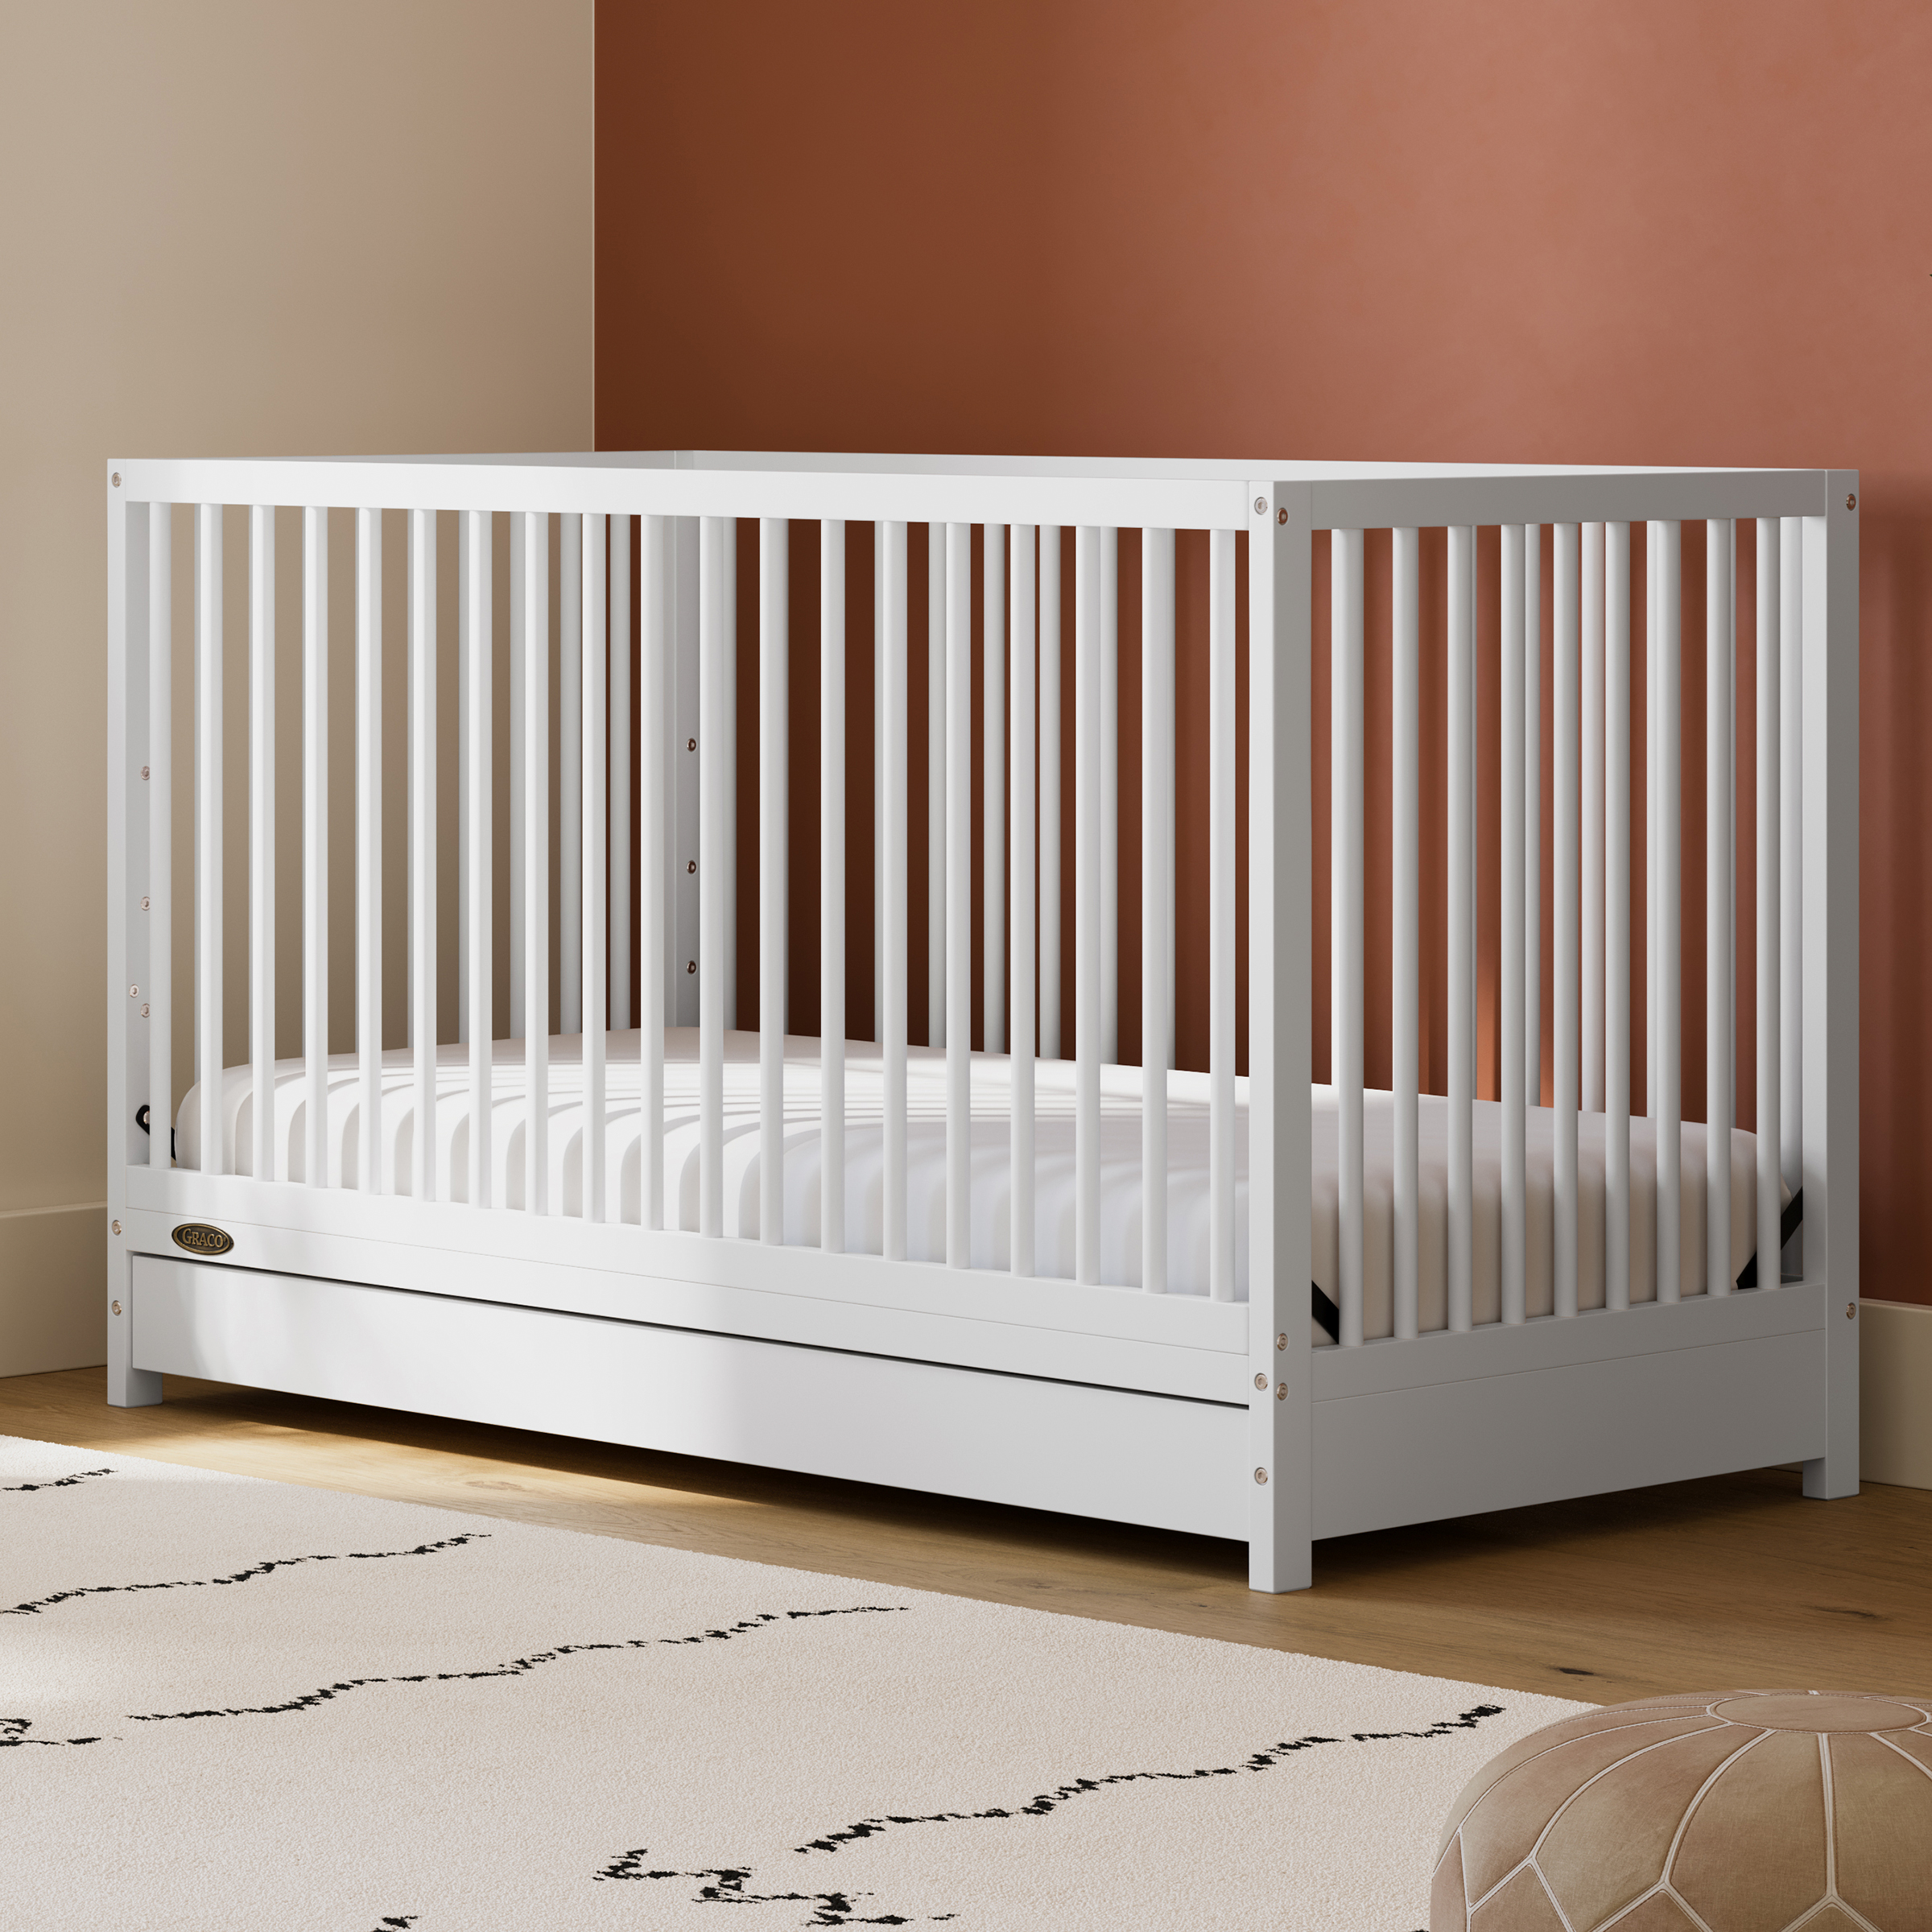 Graco Teddi 5-in-1 Convertible Baby Crib with Drawer, White - image 2 of 15